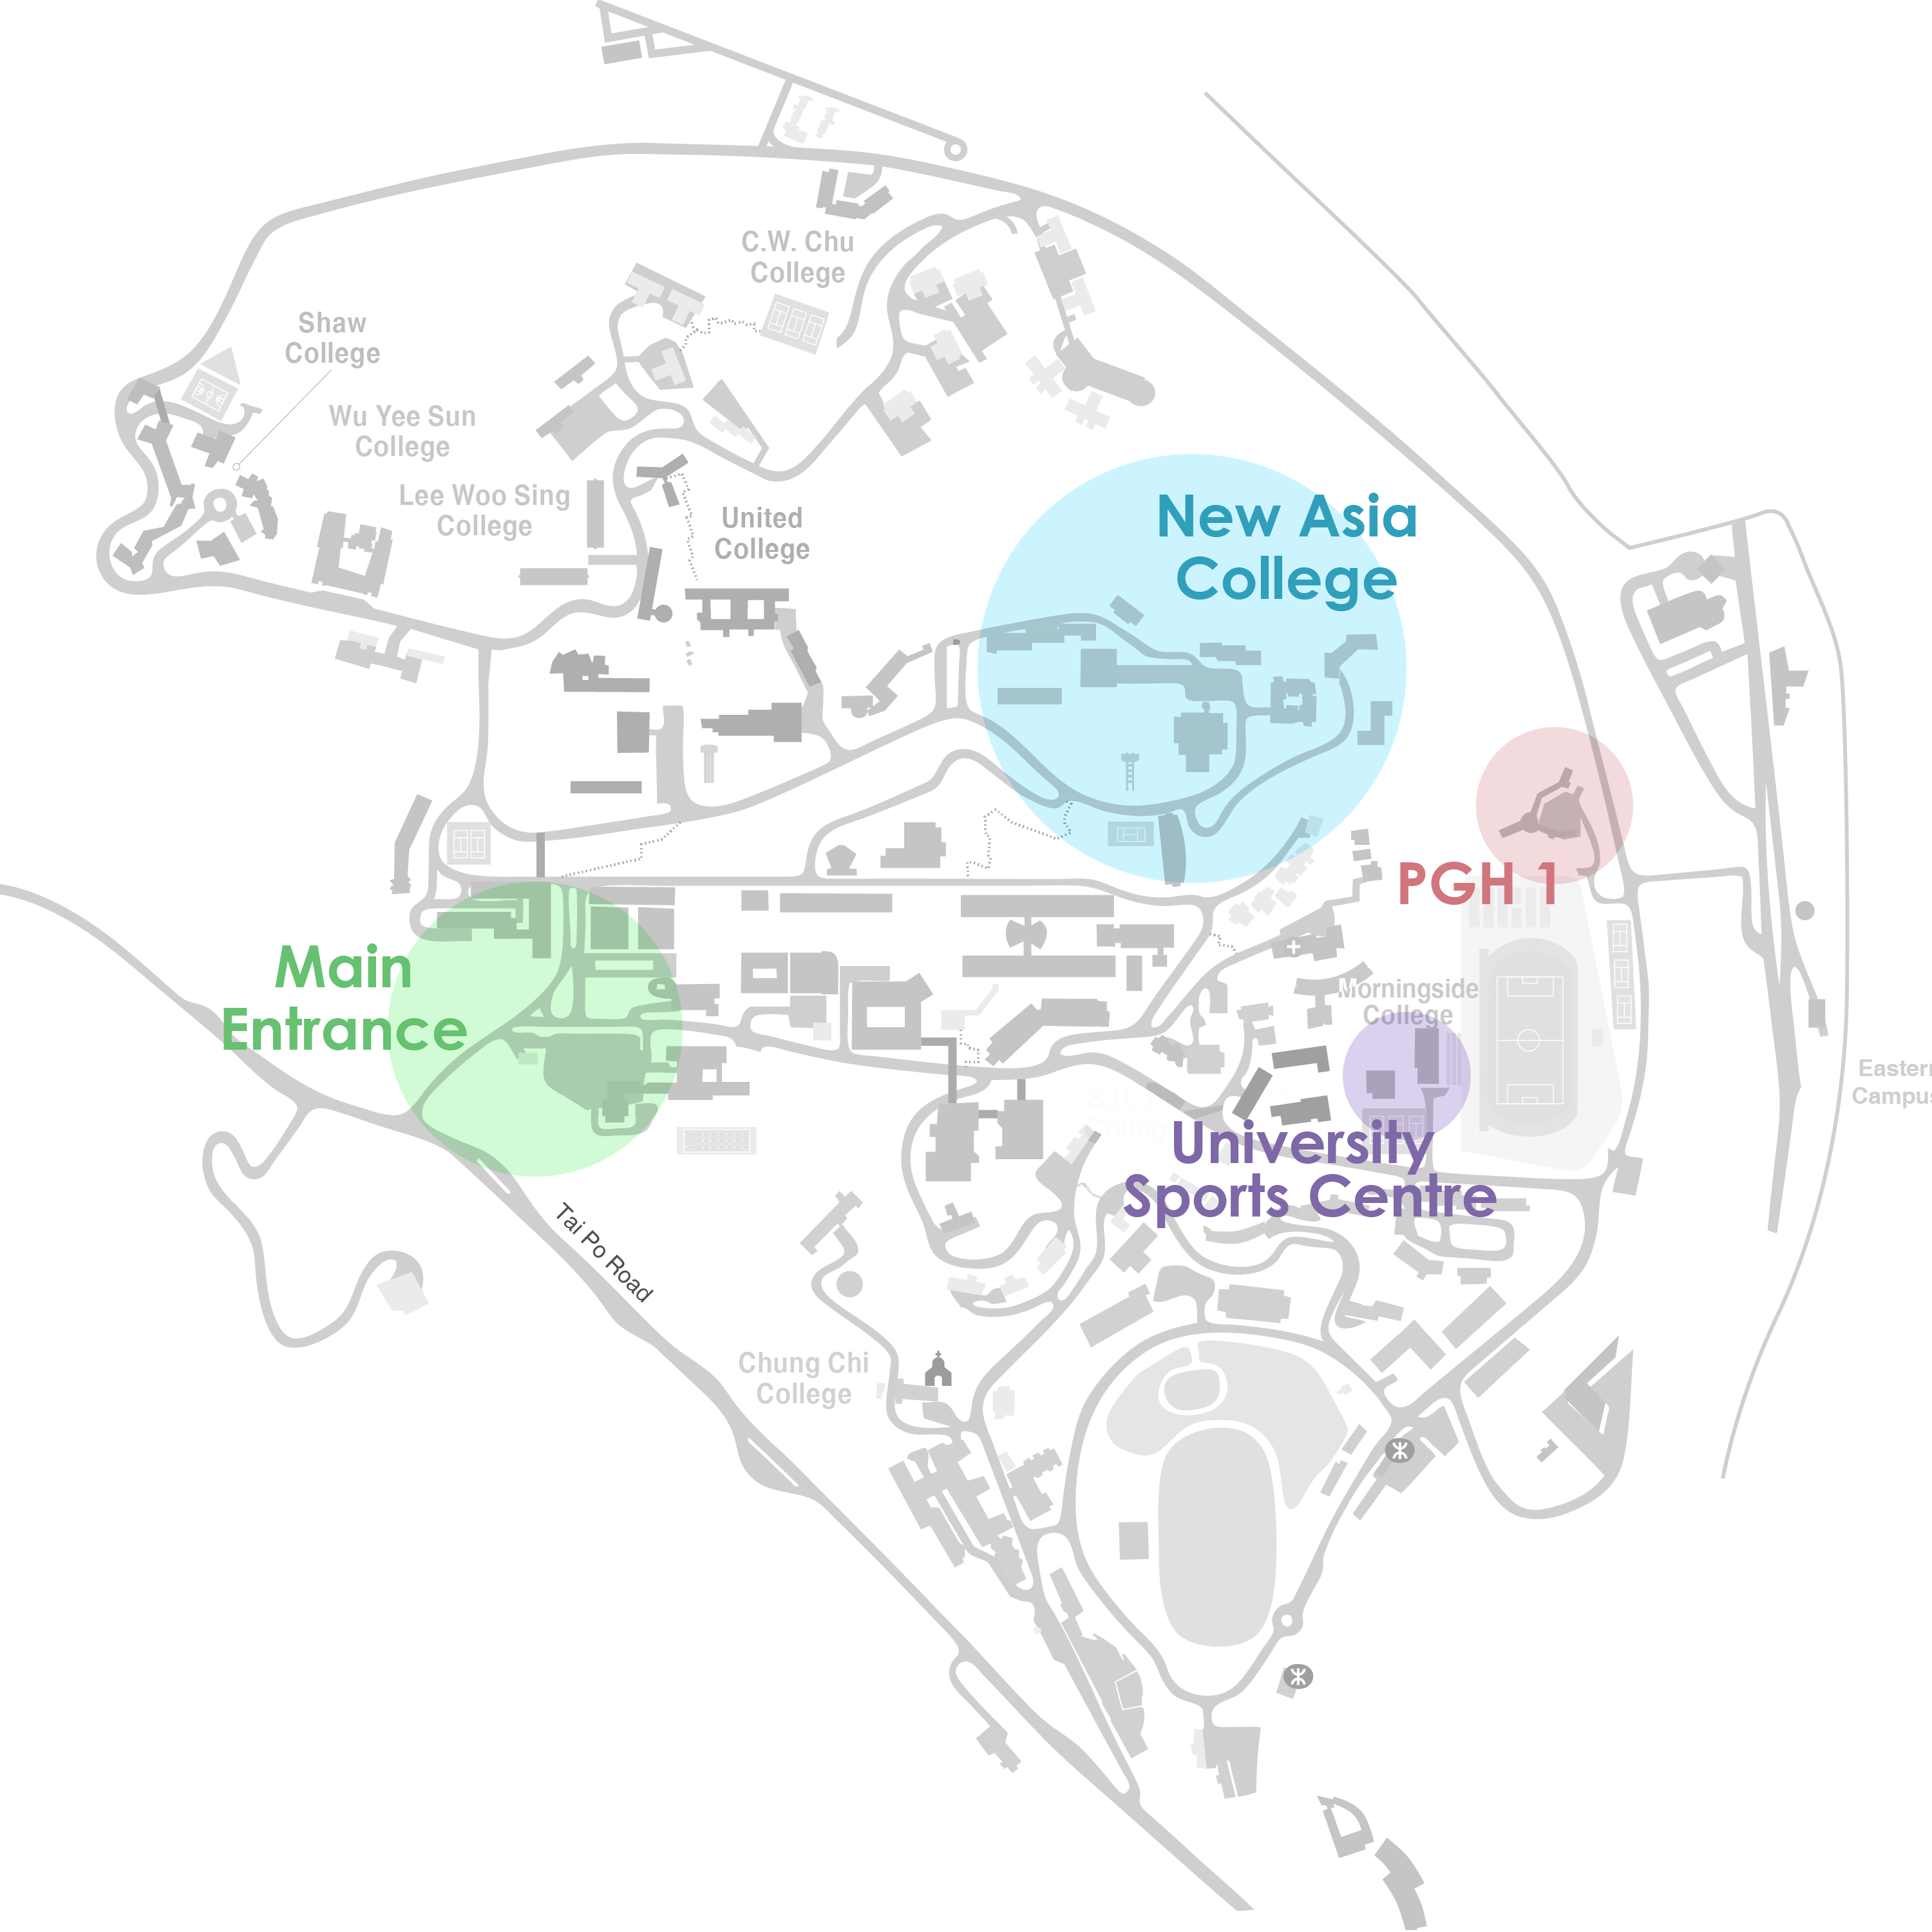 Campus map and sampling locations